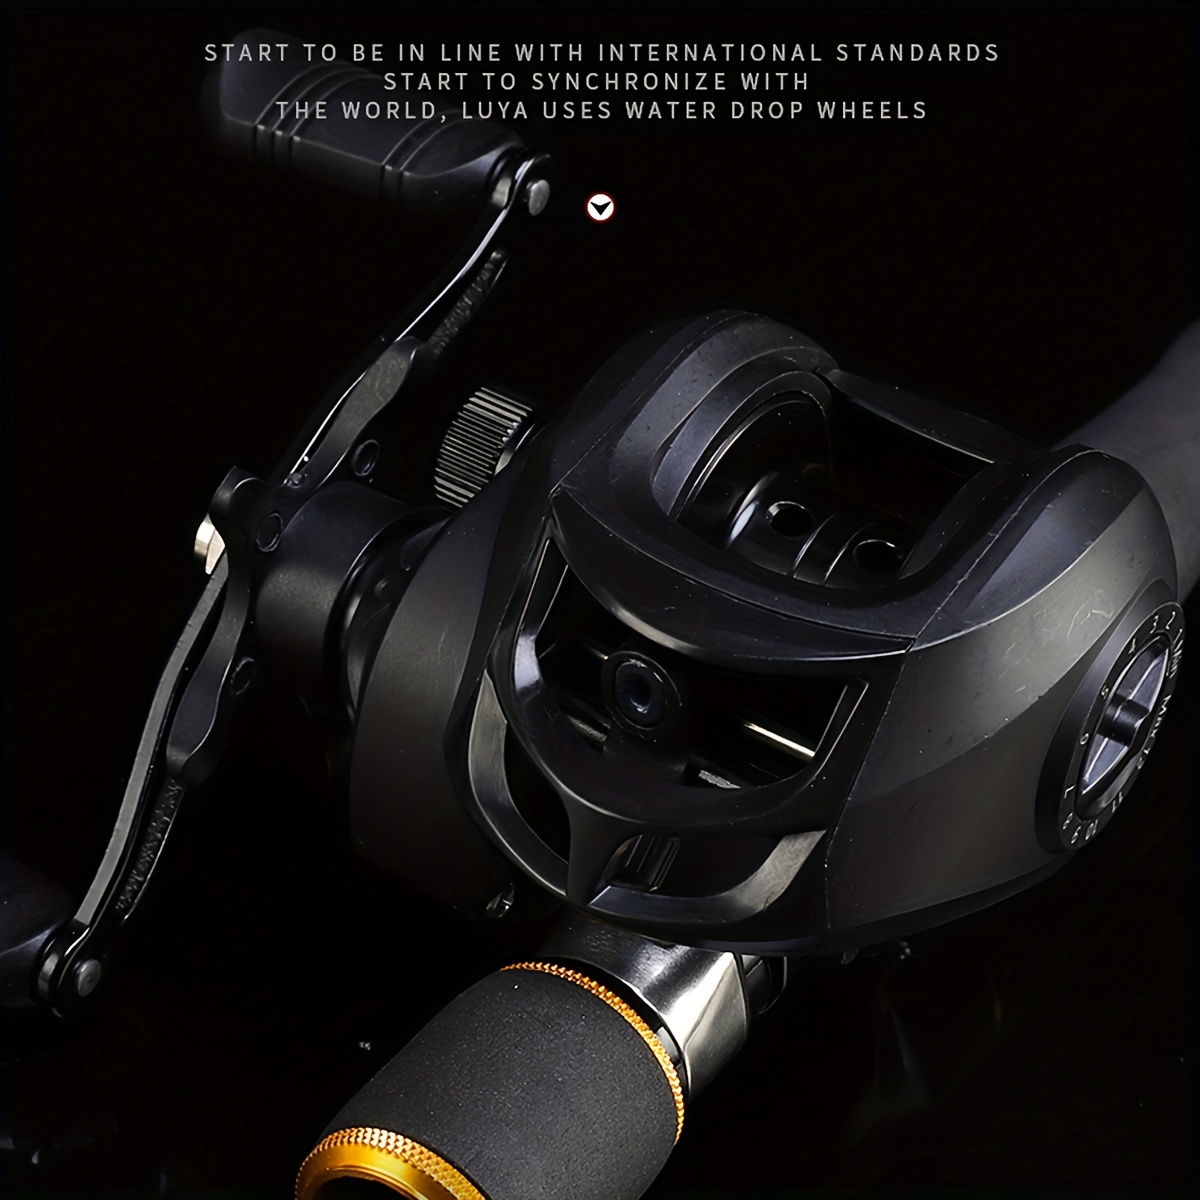 News 2090 Right Hand Round Baitcast Reel Heavy Baitcasting Reels Variety Of  Models High Quality9514208 From Onna, $23.21